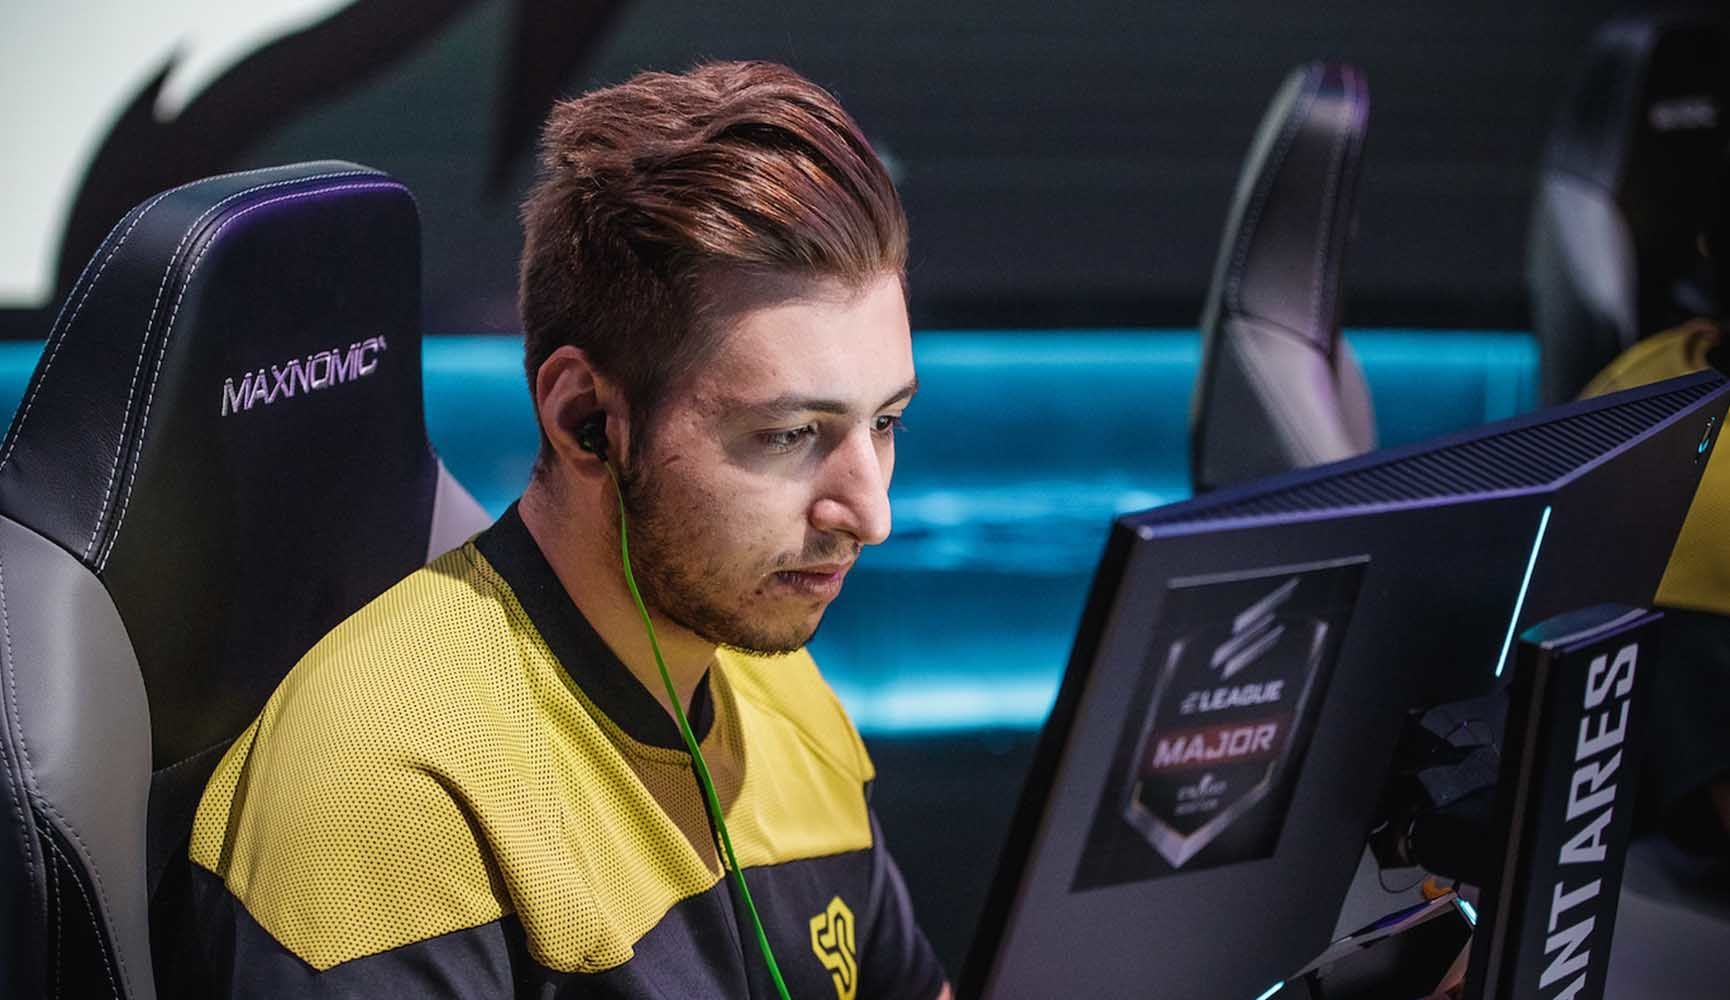 XANTARES: Ping problems are our biggest enemy